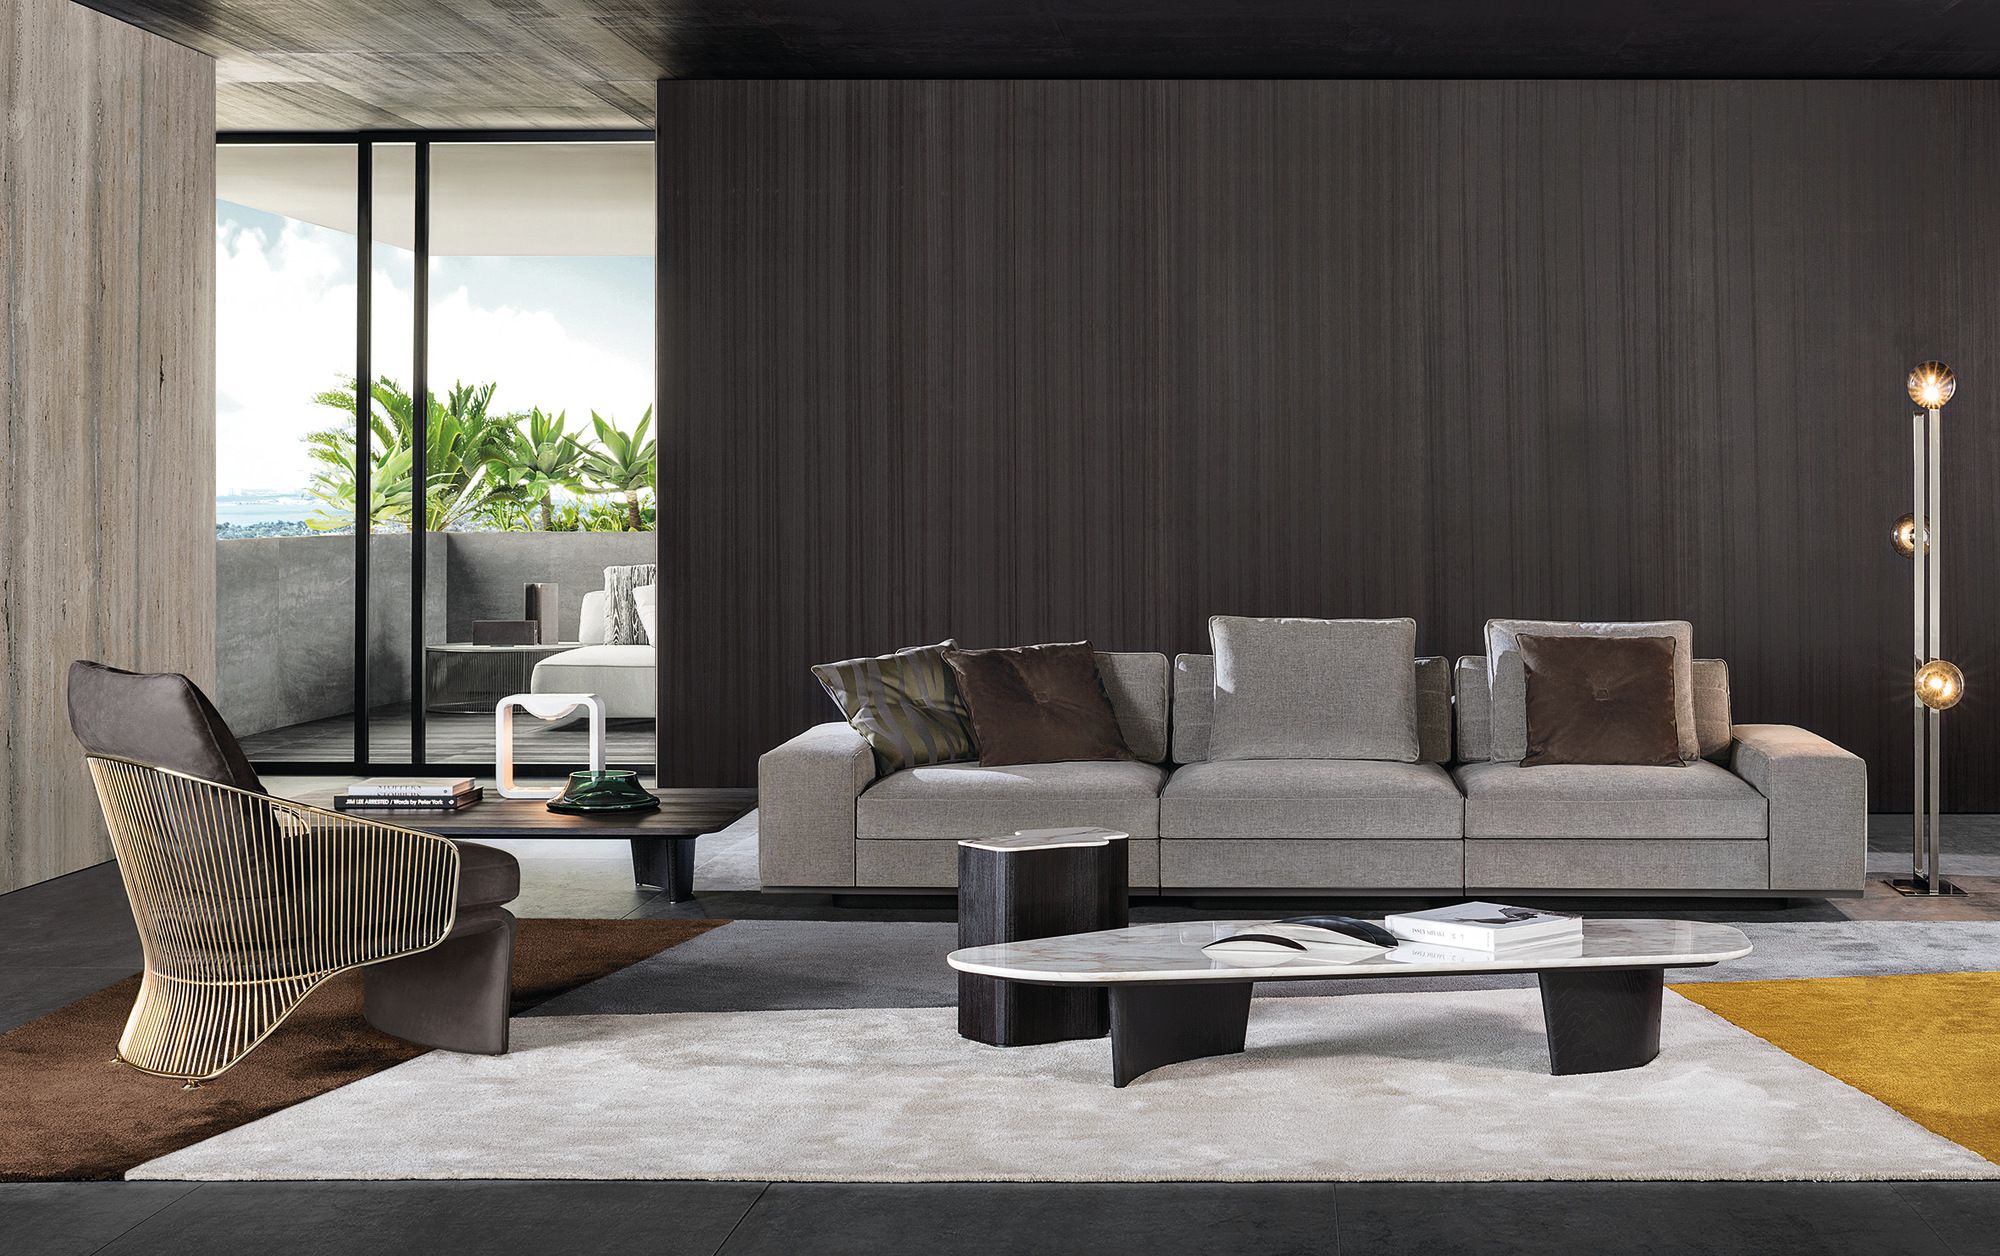 LAWRENCE CLAN Lawrence Collection By Minotti design Rodolfo Dordoni